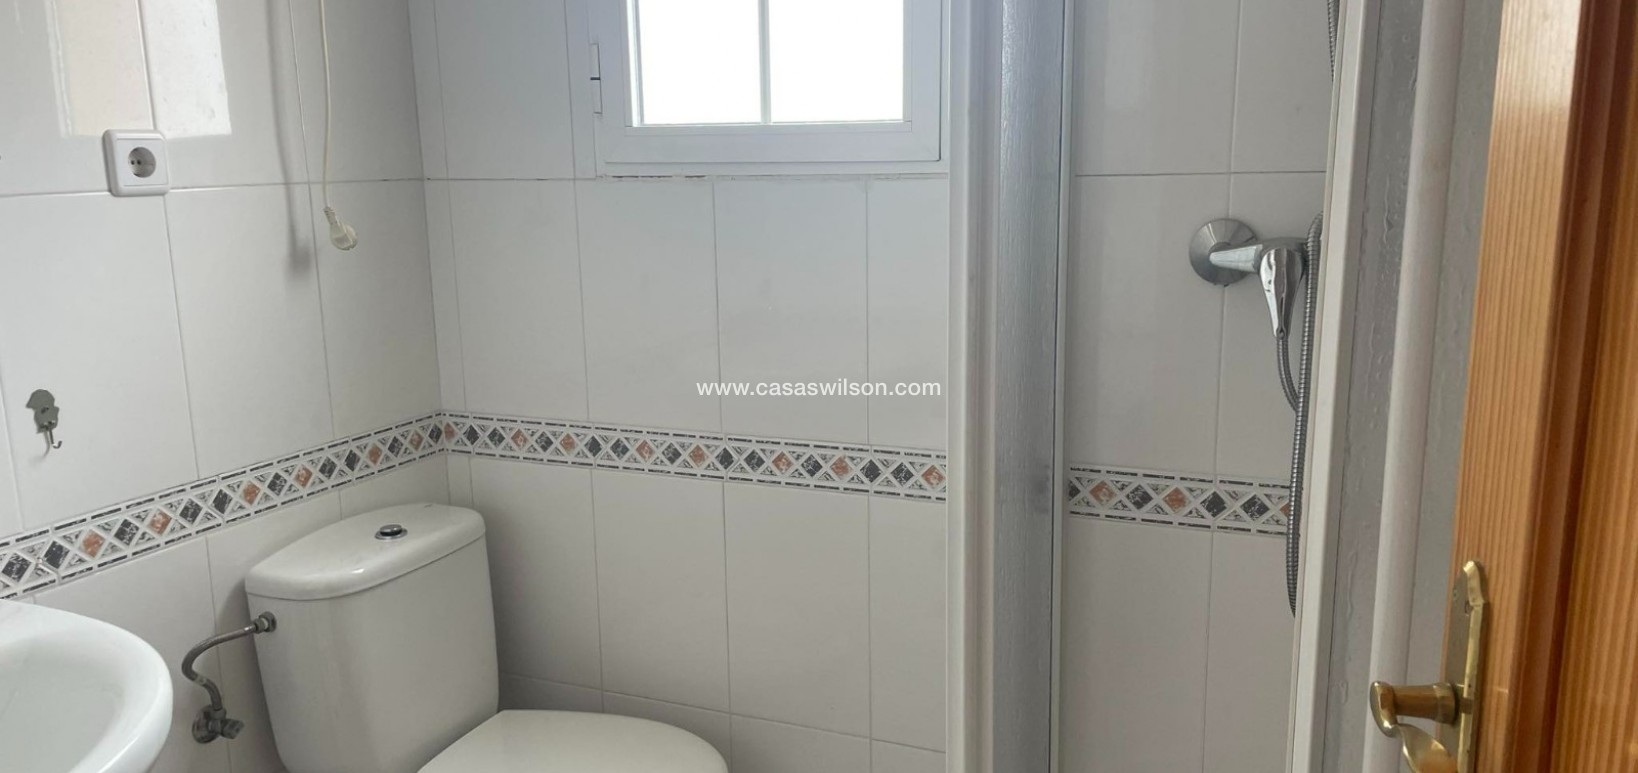 Sale - House - Townhouse - Torrevieja - Los Balcones